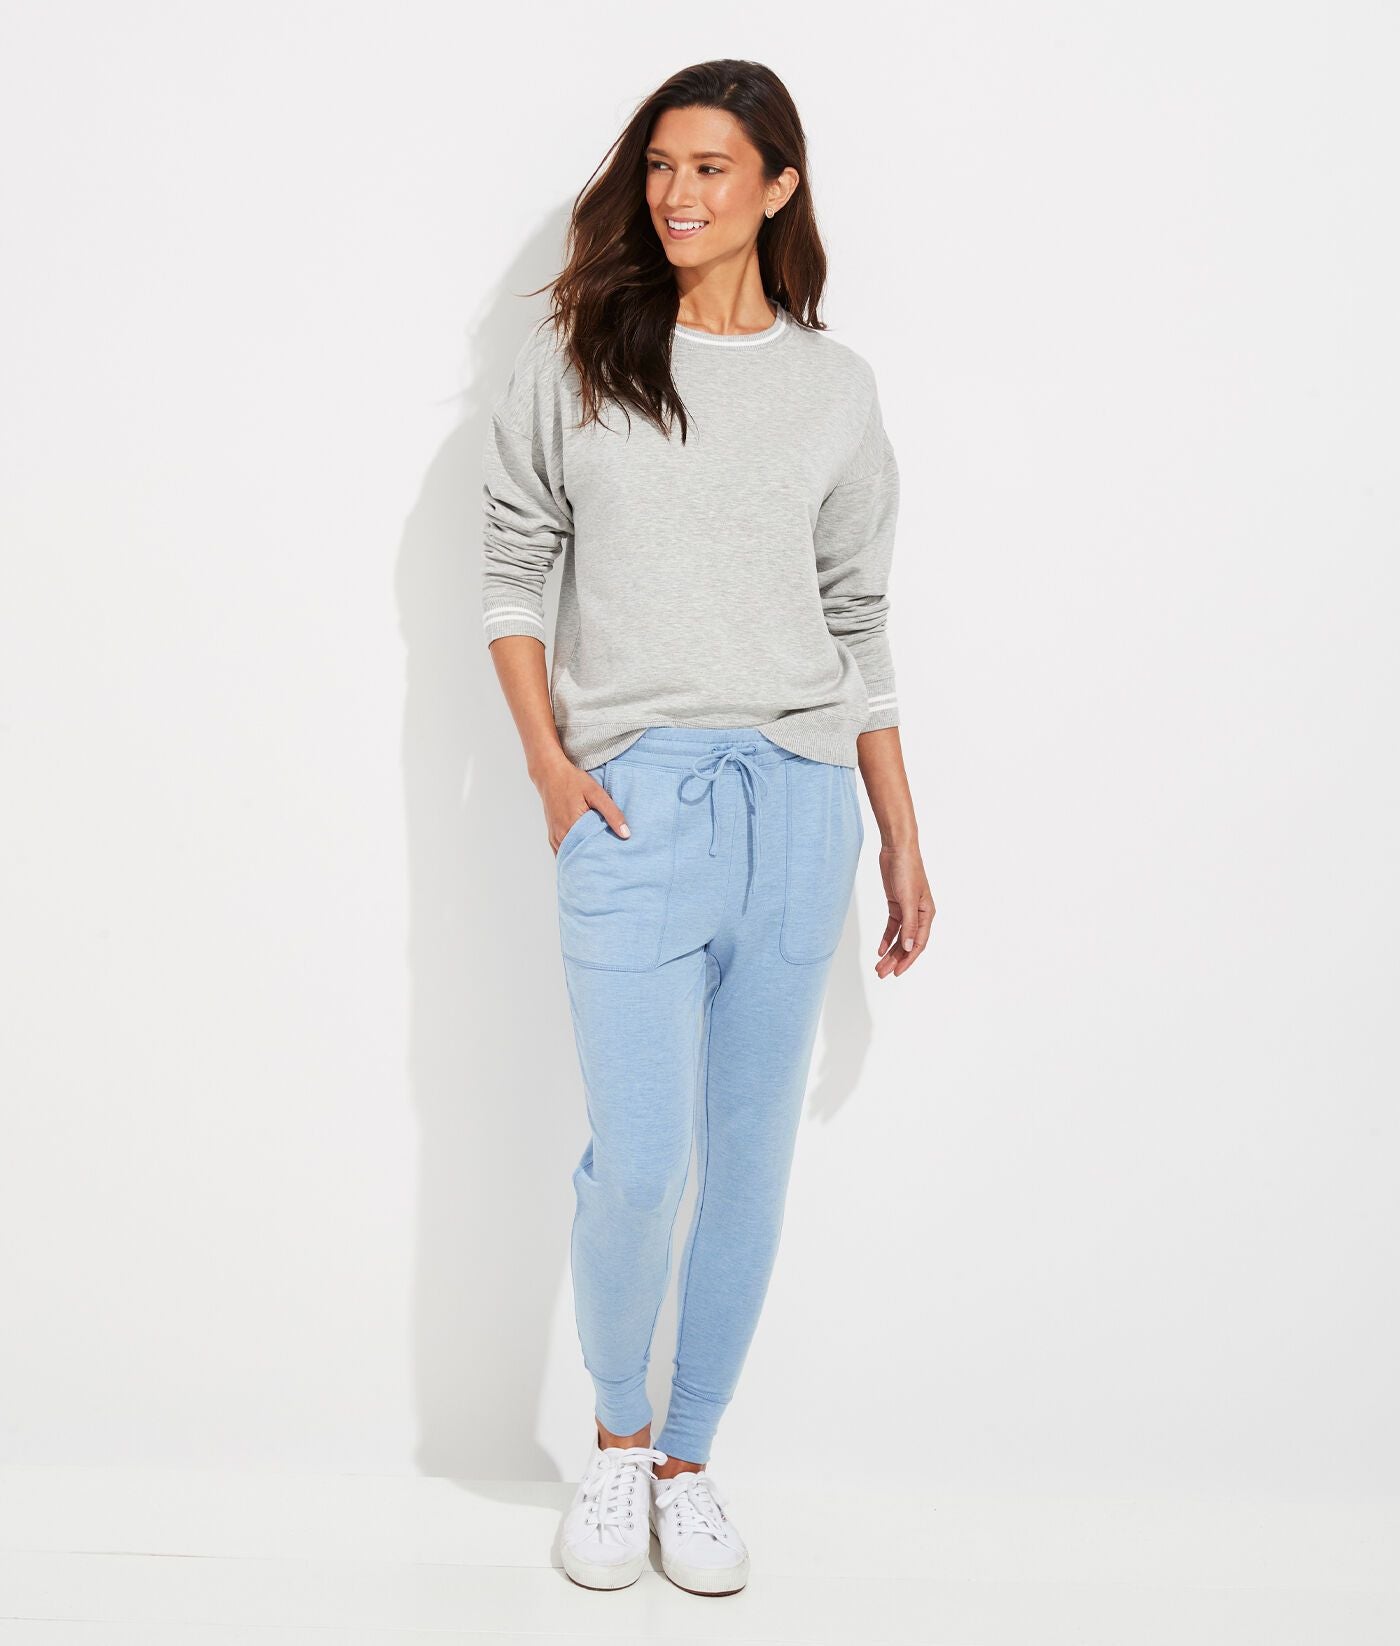 Hawthorne Women's Pants On Sale Up To 90% Off Retail